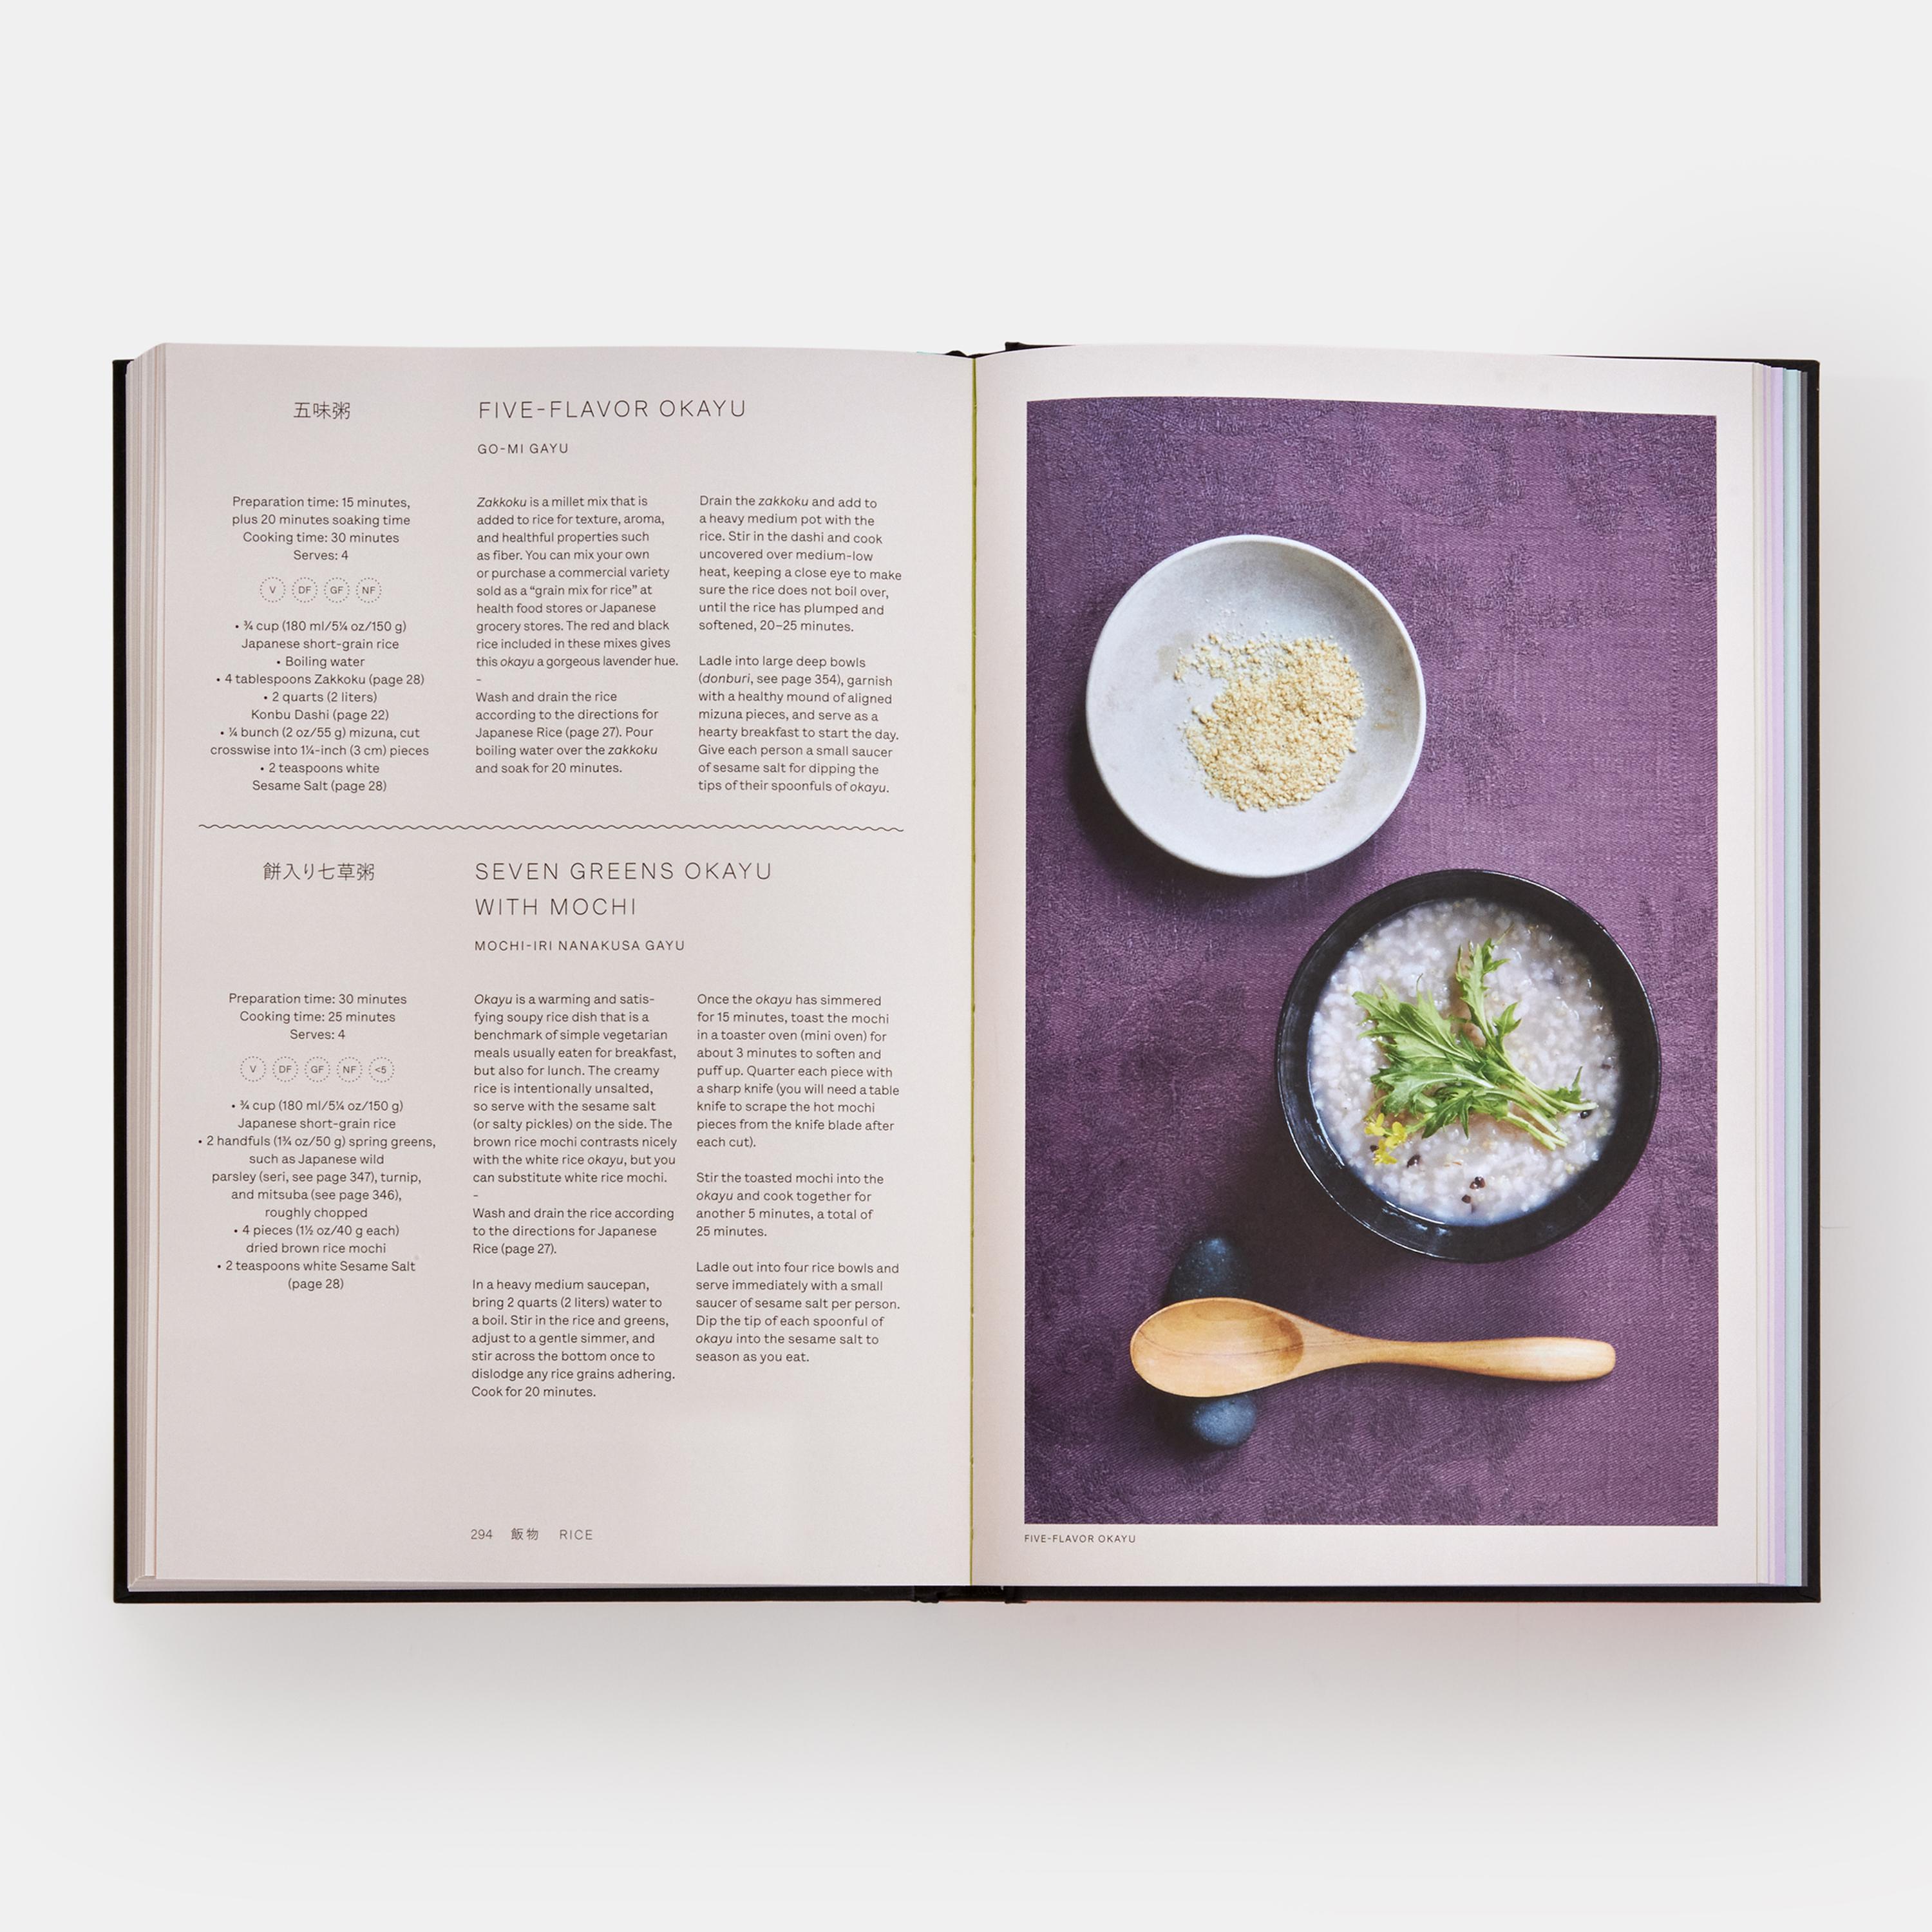 ‘Extraordinary … a must have book for anyone who loves vegetables!’ – Amanda Cohen, James Beard-nominated chef and owner of Dirt Candy

From the author of global bestseller Japan: The Cookbook, more than 250 delicious, healthy vegetarian Japanese